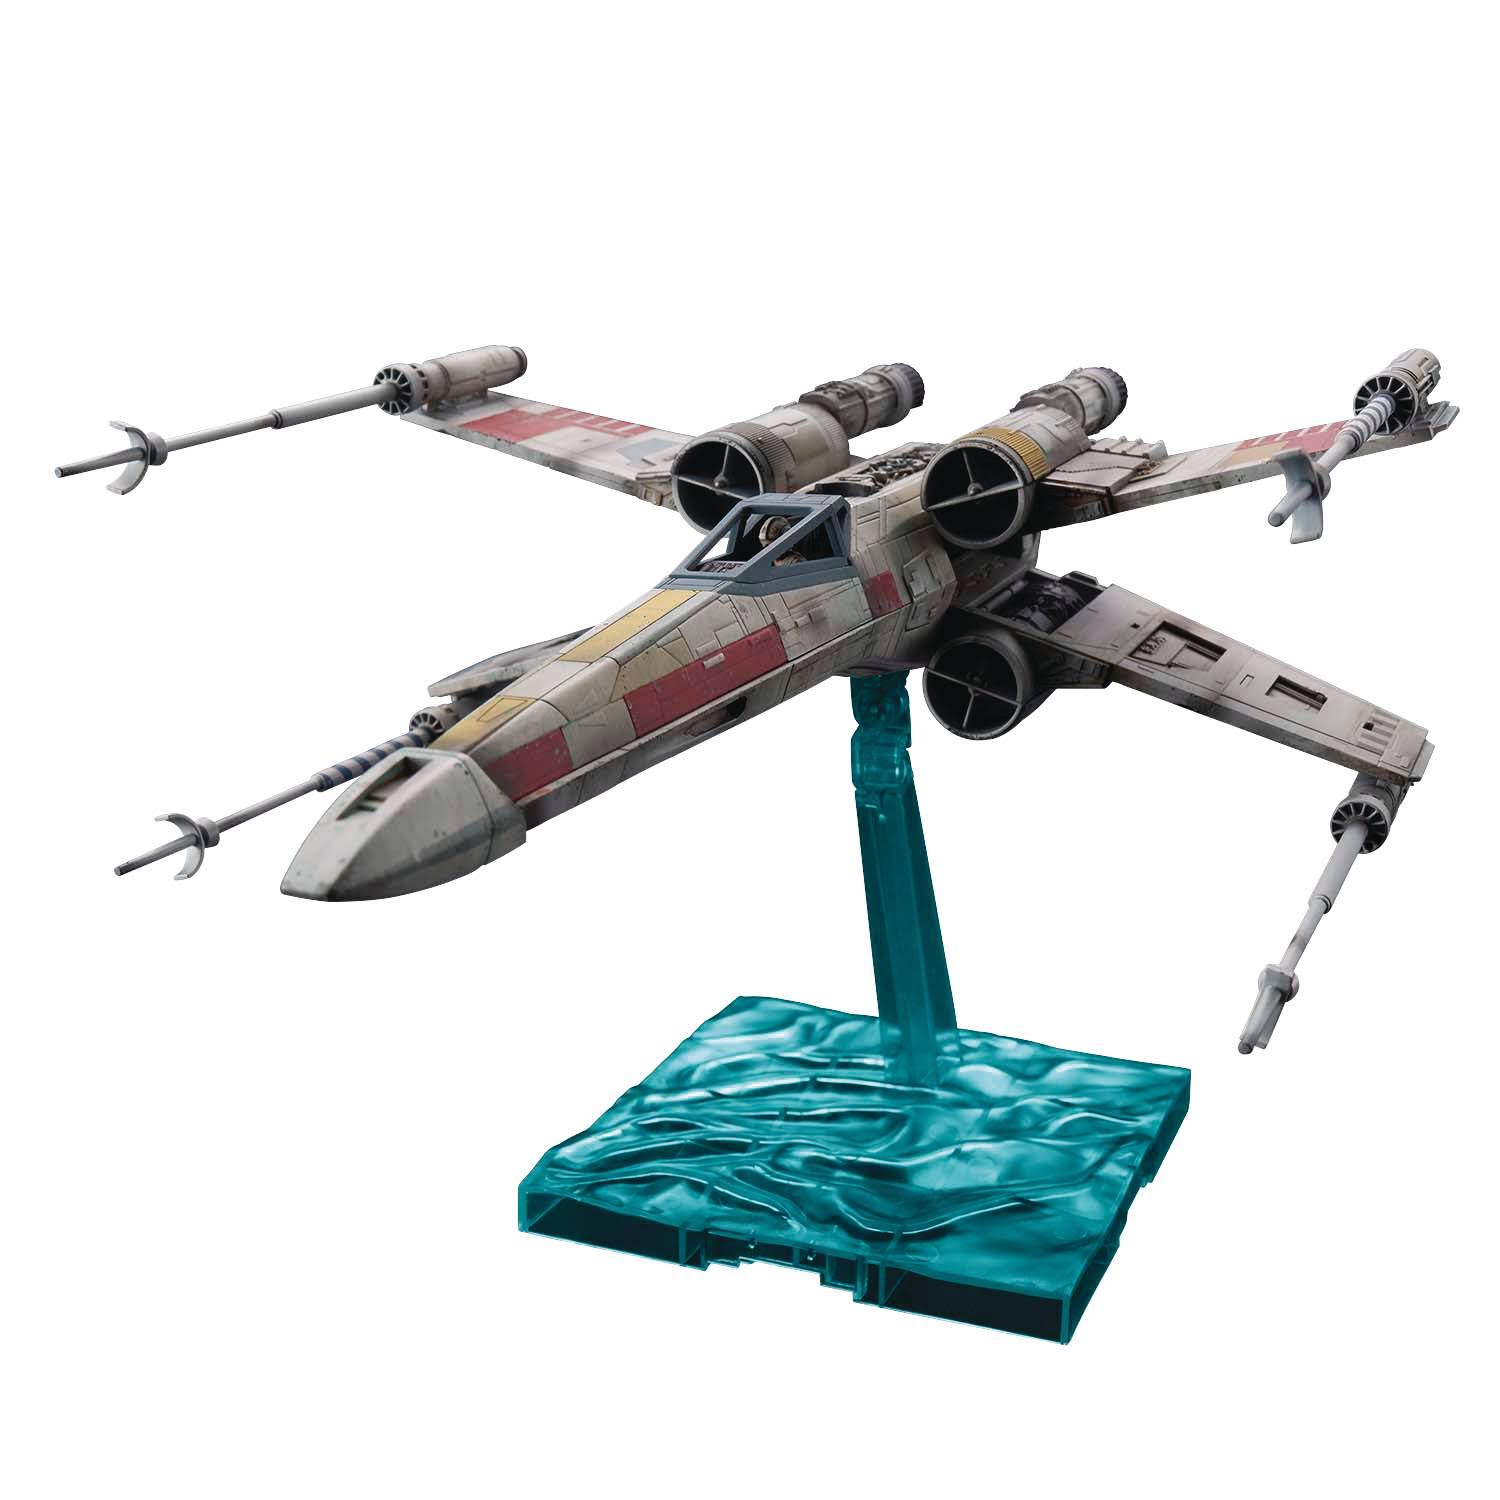 Star Wars 1/72 X-Wing Starfighter Red5 (The Rise of Skywalker)